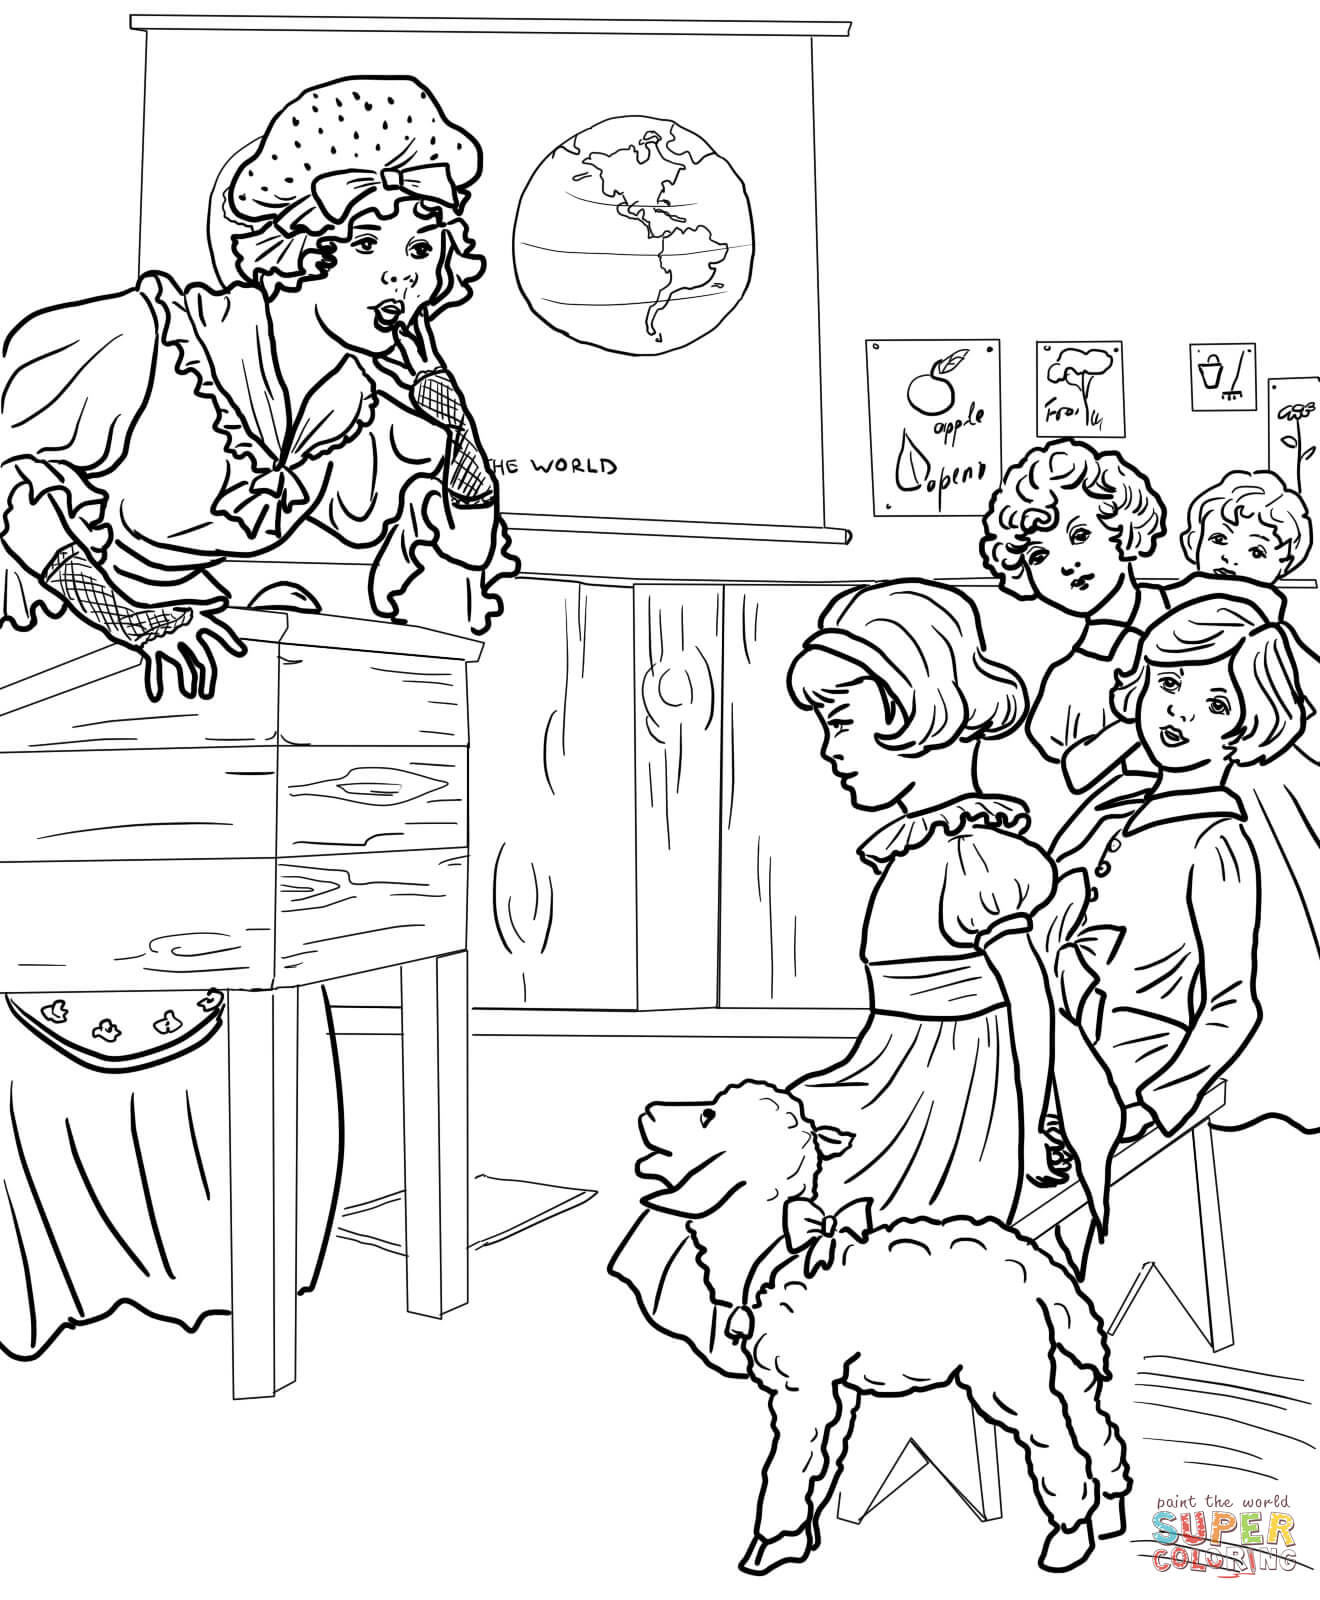 Mary Had a Little Lamb coloring page | Free Printable Coloring Pages